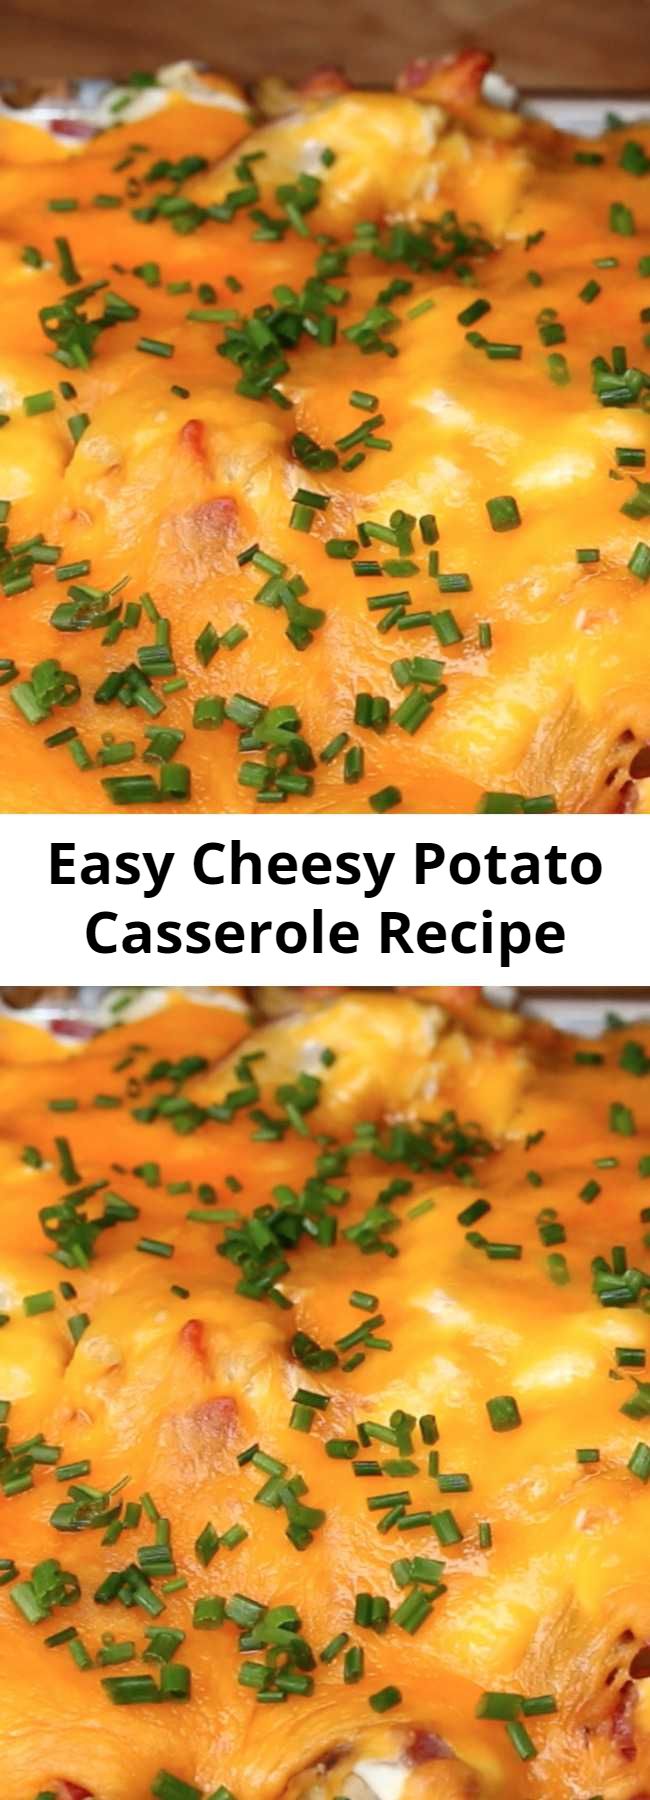 Easy Cheesy Potato Casserole Recipe - This cheesy potato casserole is the perfect way to feed a family of picky eaters. With all of the components of beloved loaded potato skins (like bacon, sour cream, and cheese), it’s practically impossible for anyone to dislike this casserole. It’s make-ahead friendly, filling, and easily made vegetarian by omitting the bacon. If you’re looking for the ultimate weeknight casserole, this is your recipe.